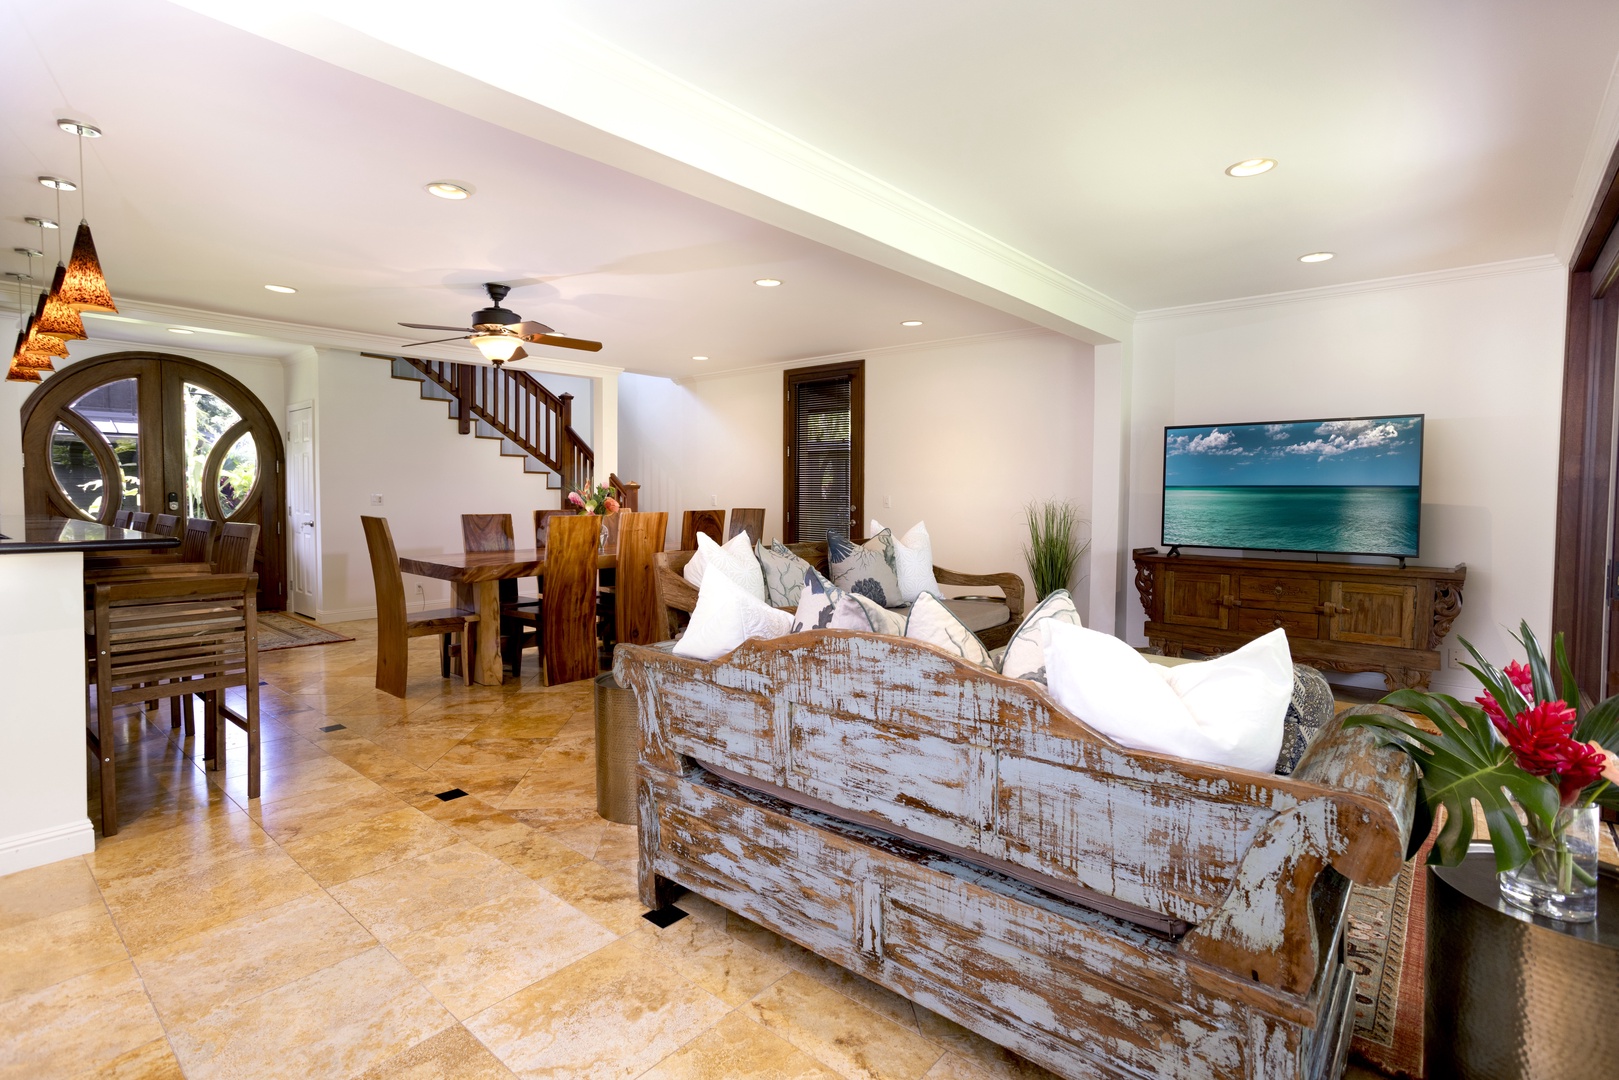 Kailua Vacation Rentals, Mokulua Seaside - Bright and airy living area for fun family time